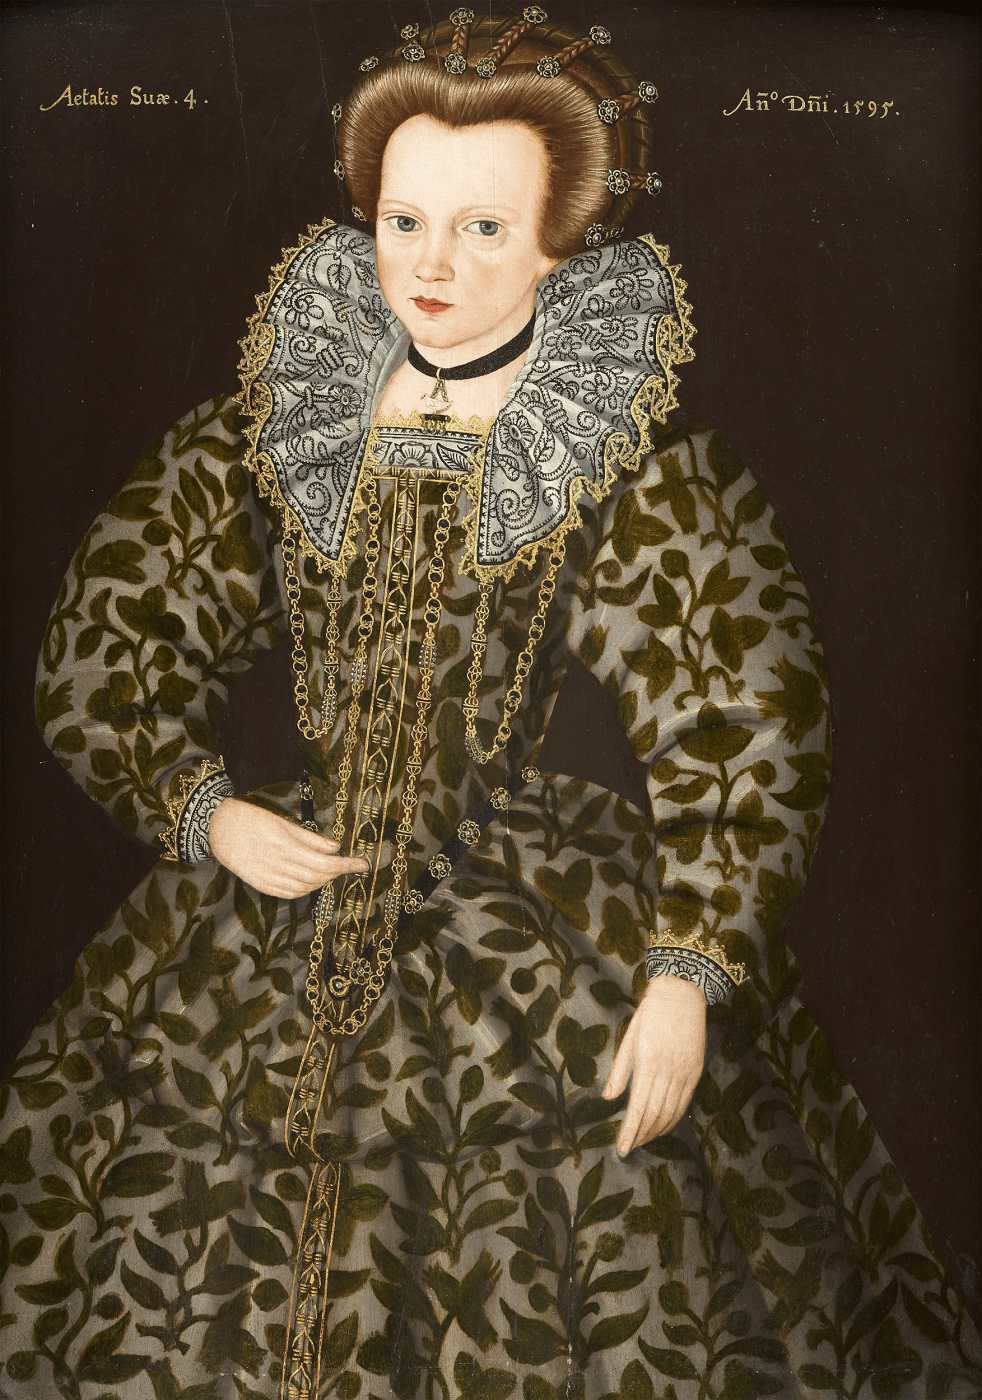 Portrait old master painting of a young Tudor girl dressed in 16th century dress and ruff